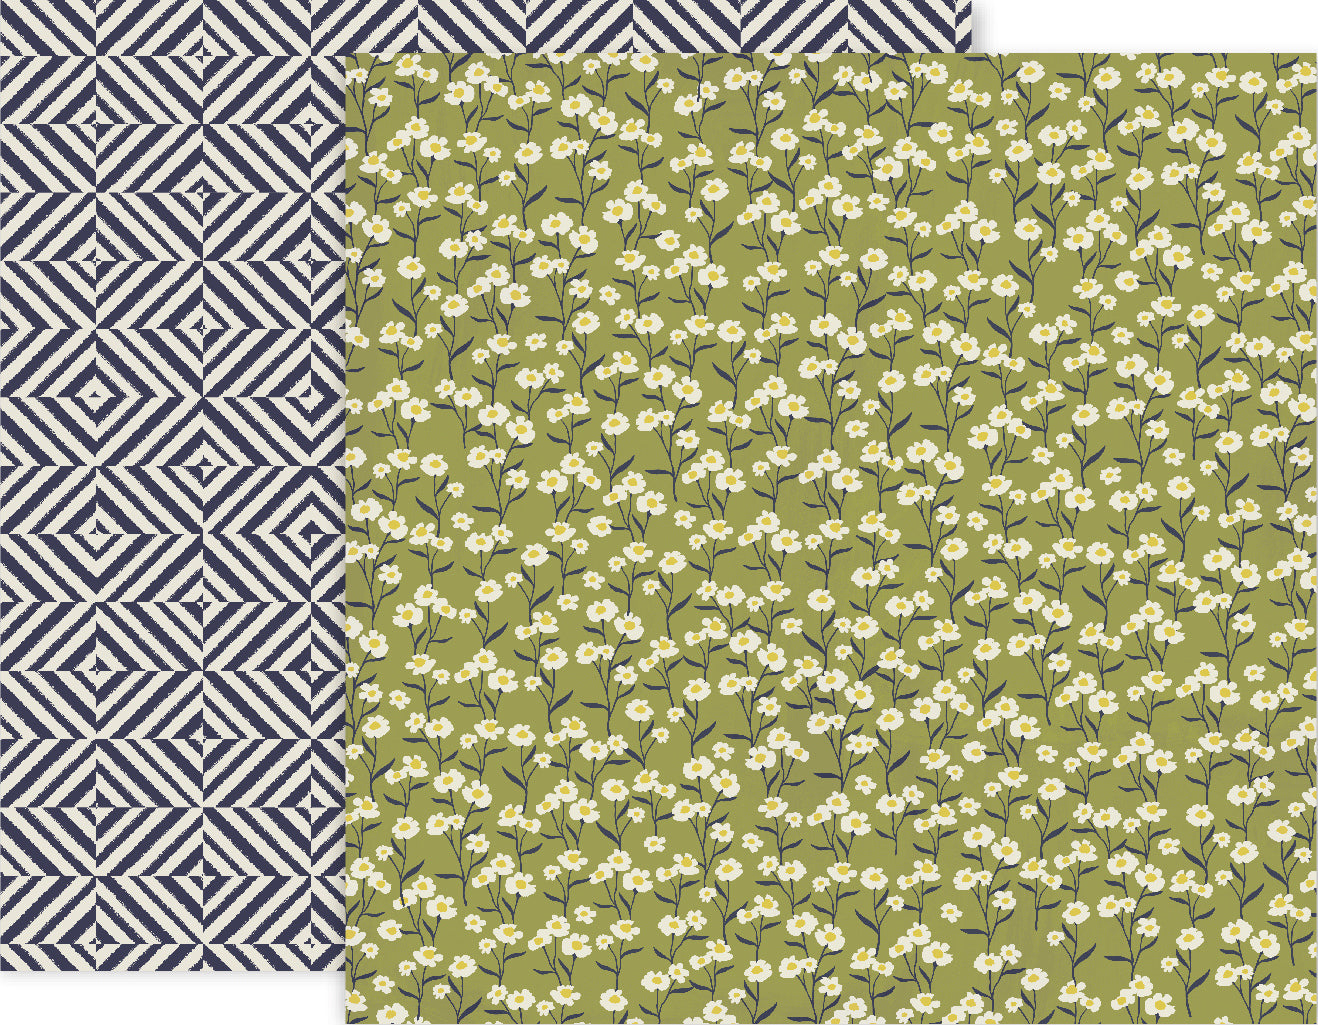 12x12 double-sided patterned paper with white flowers on green background and crazy black and white geometric design on reverse - Pink Paislee